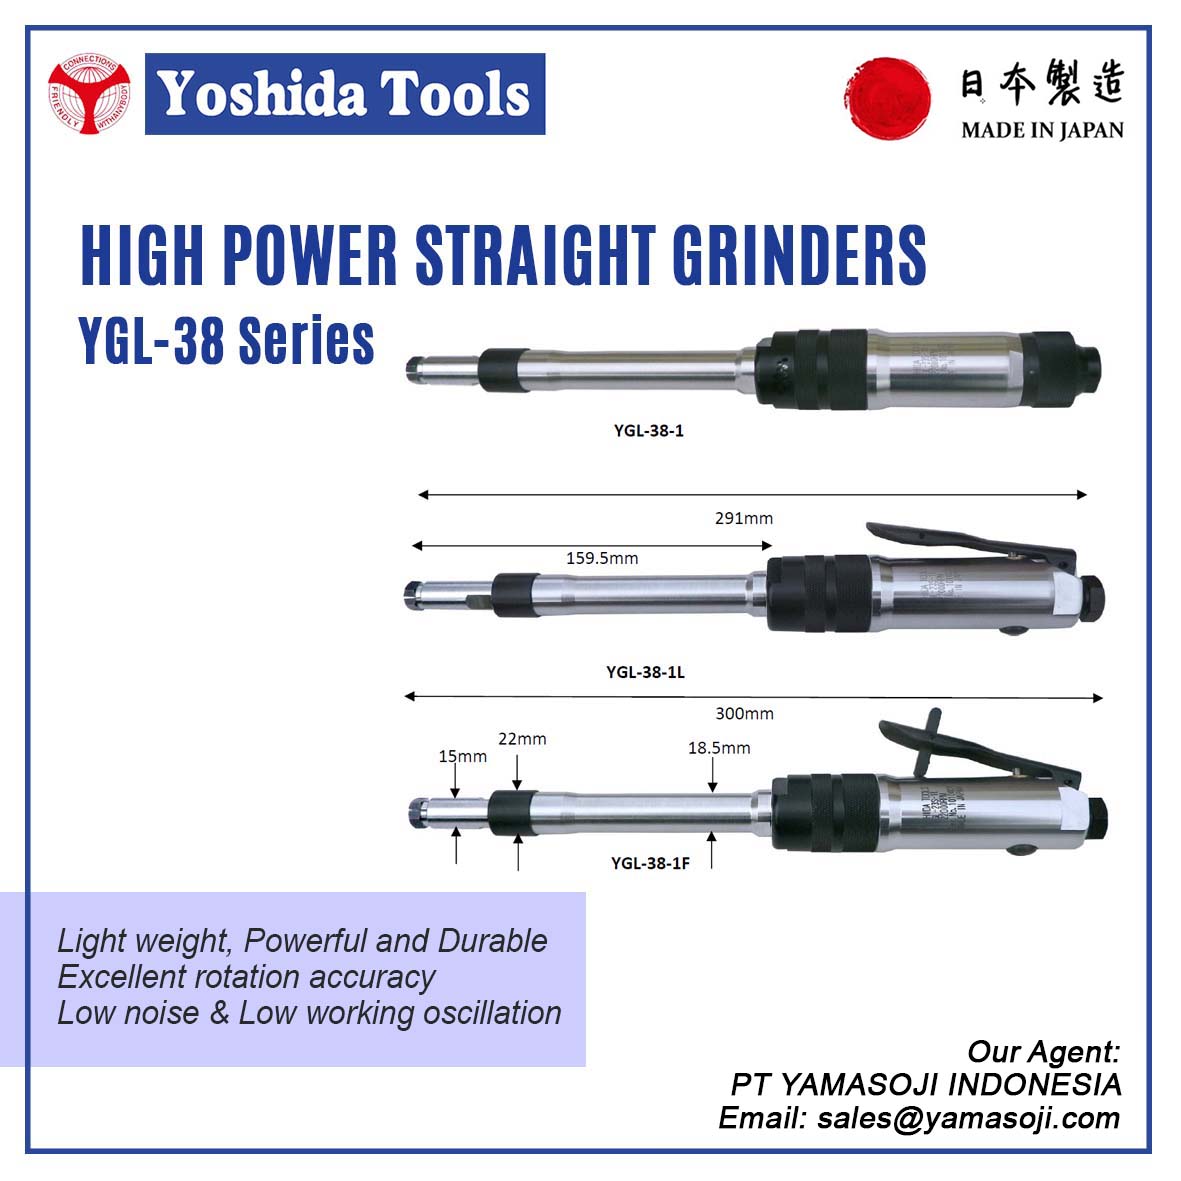 HIGH POWER STRAIGHT GRINDERS YGL-38 SERIES